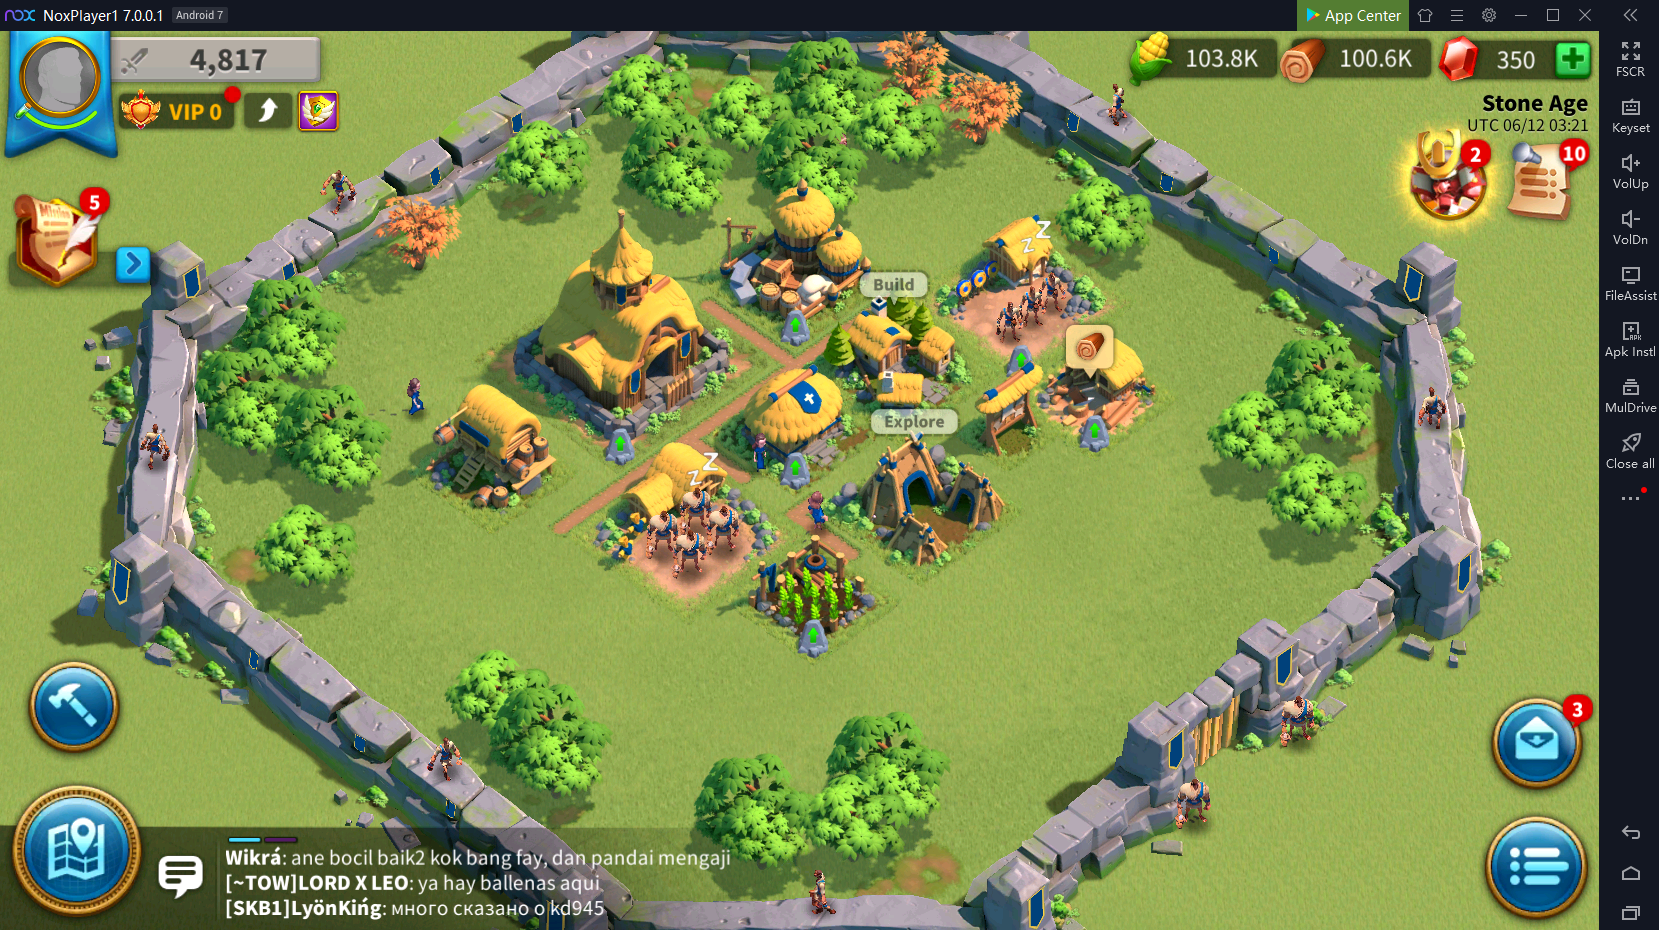 Download & Play Kingdom Clash - Legions Battle on PC with NoxPlayer -  Appcenter